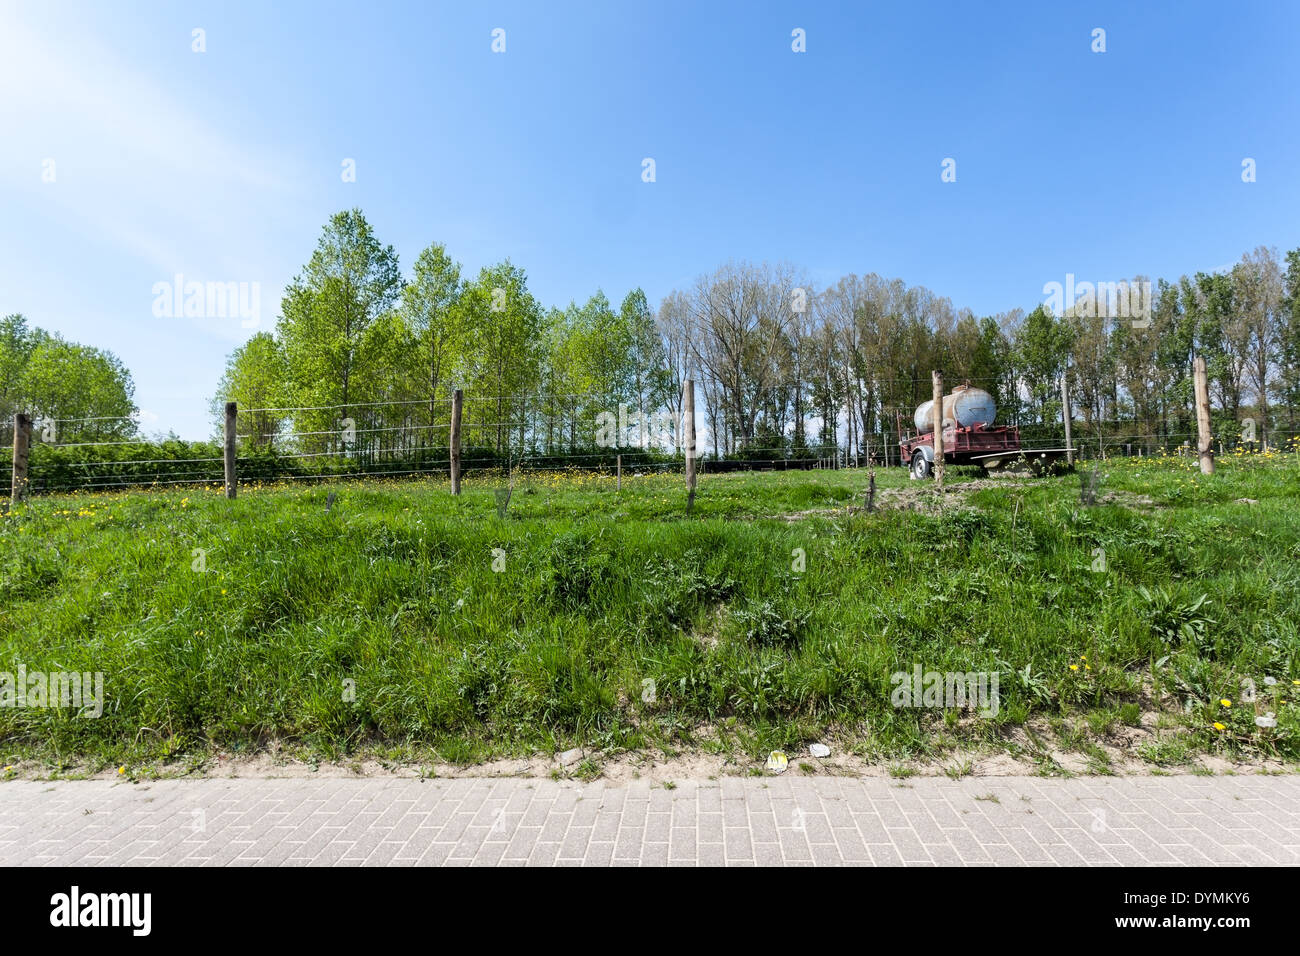 longest track, there are many meadows with fence around it Stock Photo